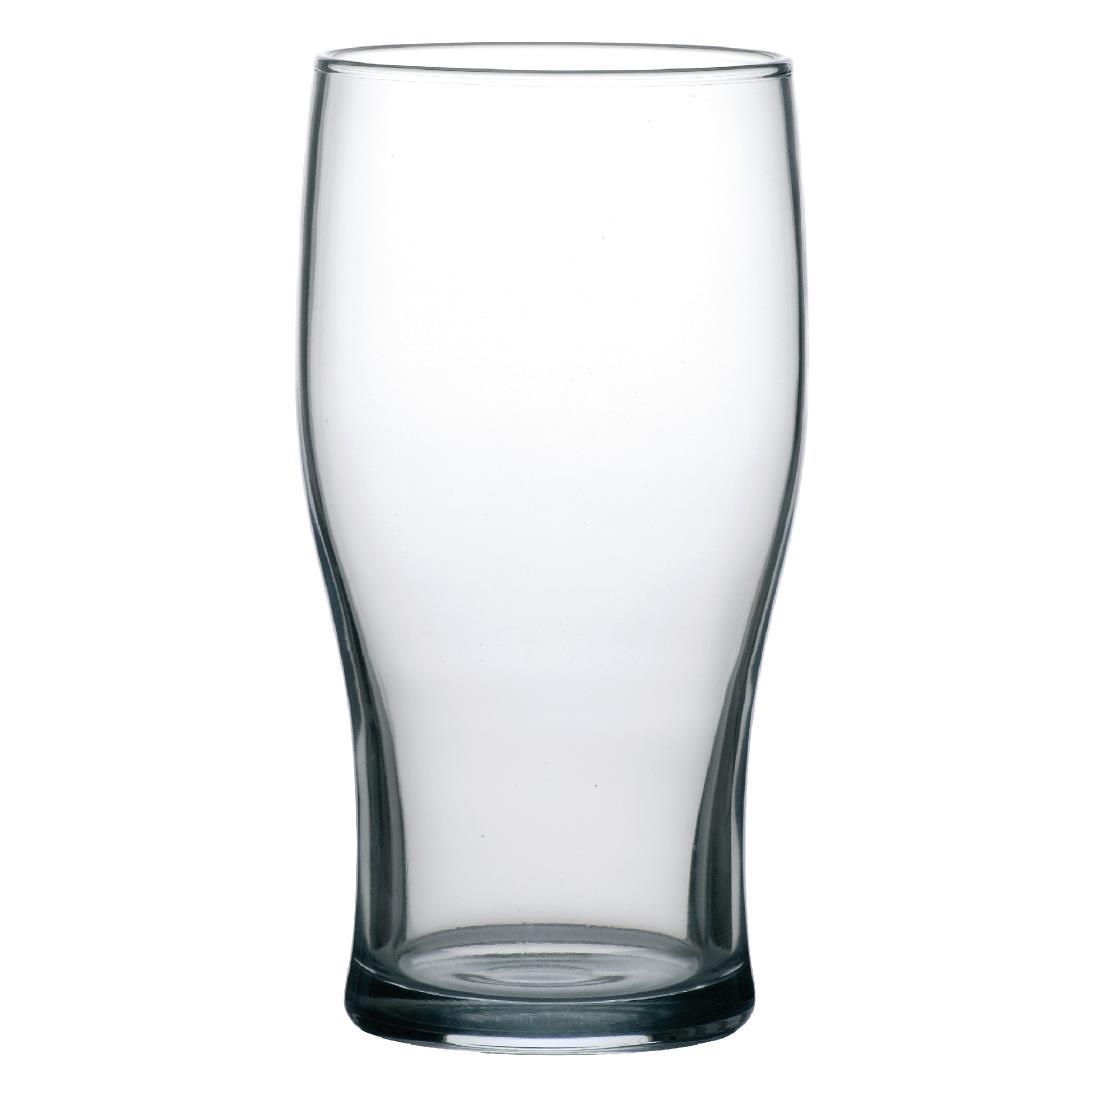 Arcoroc Tulip Beer Glasses 570ml CE Marked (Pack of 48) - D934  - 1